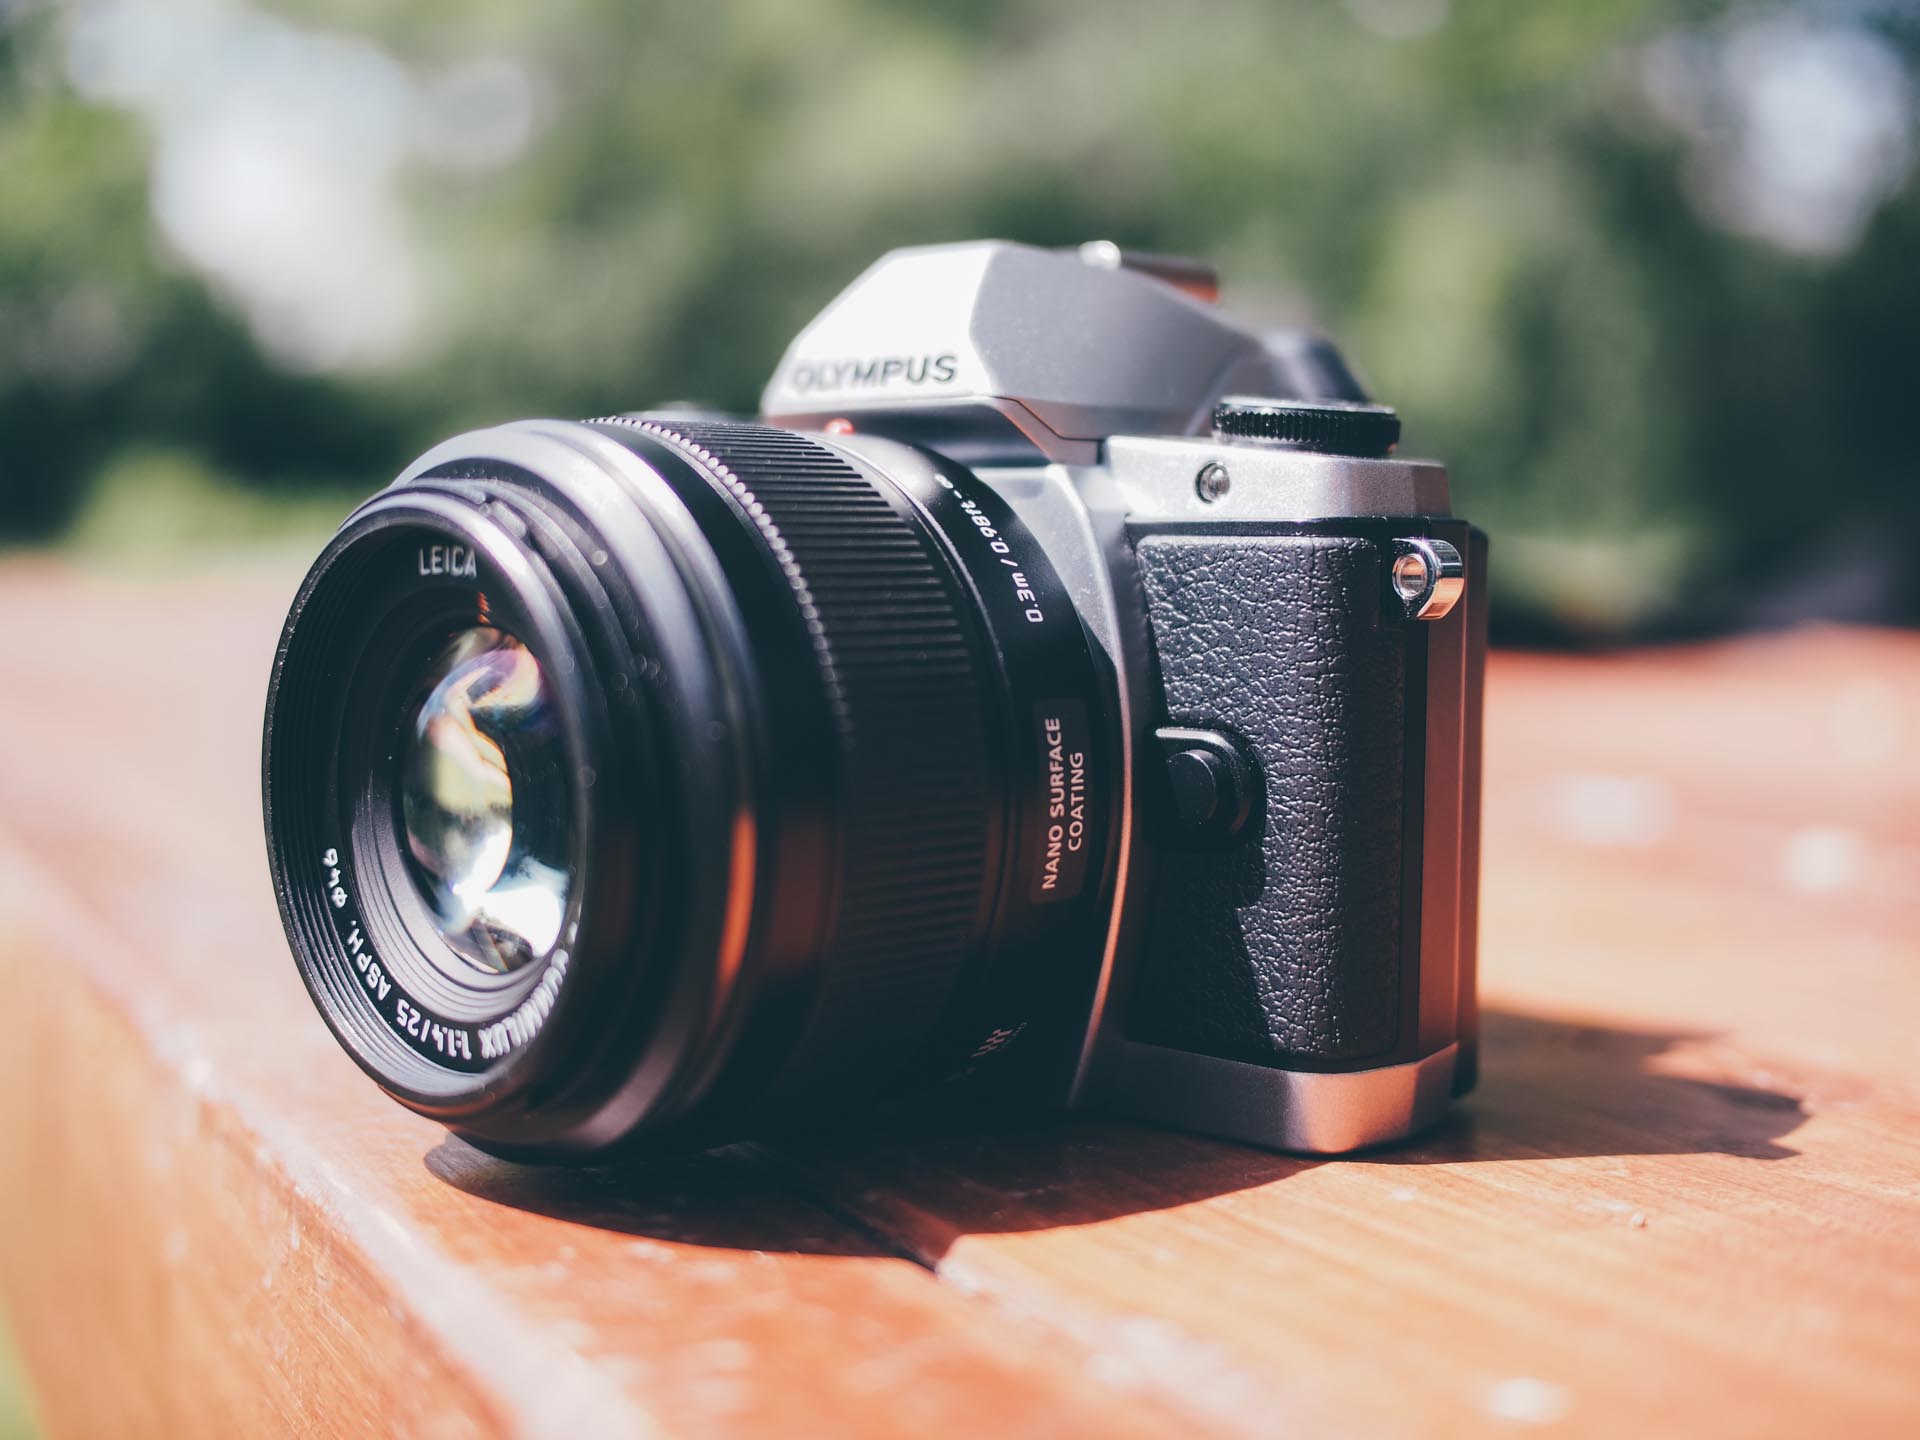 The Olympus E-M10 with the Panasonic Leica Summilux 25mm f/1.4 lens. The daily rig.